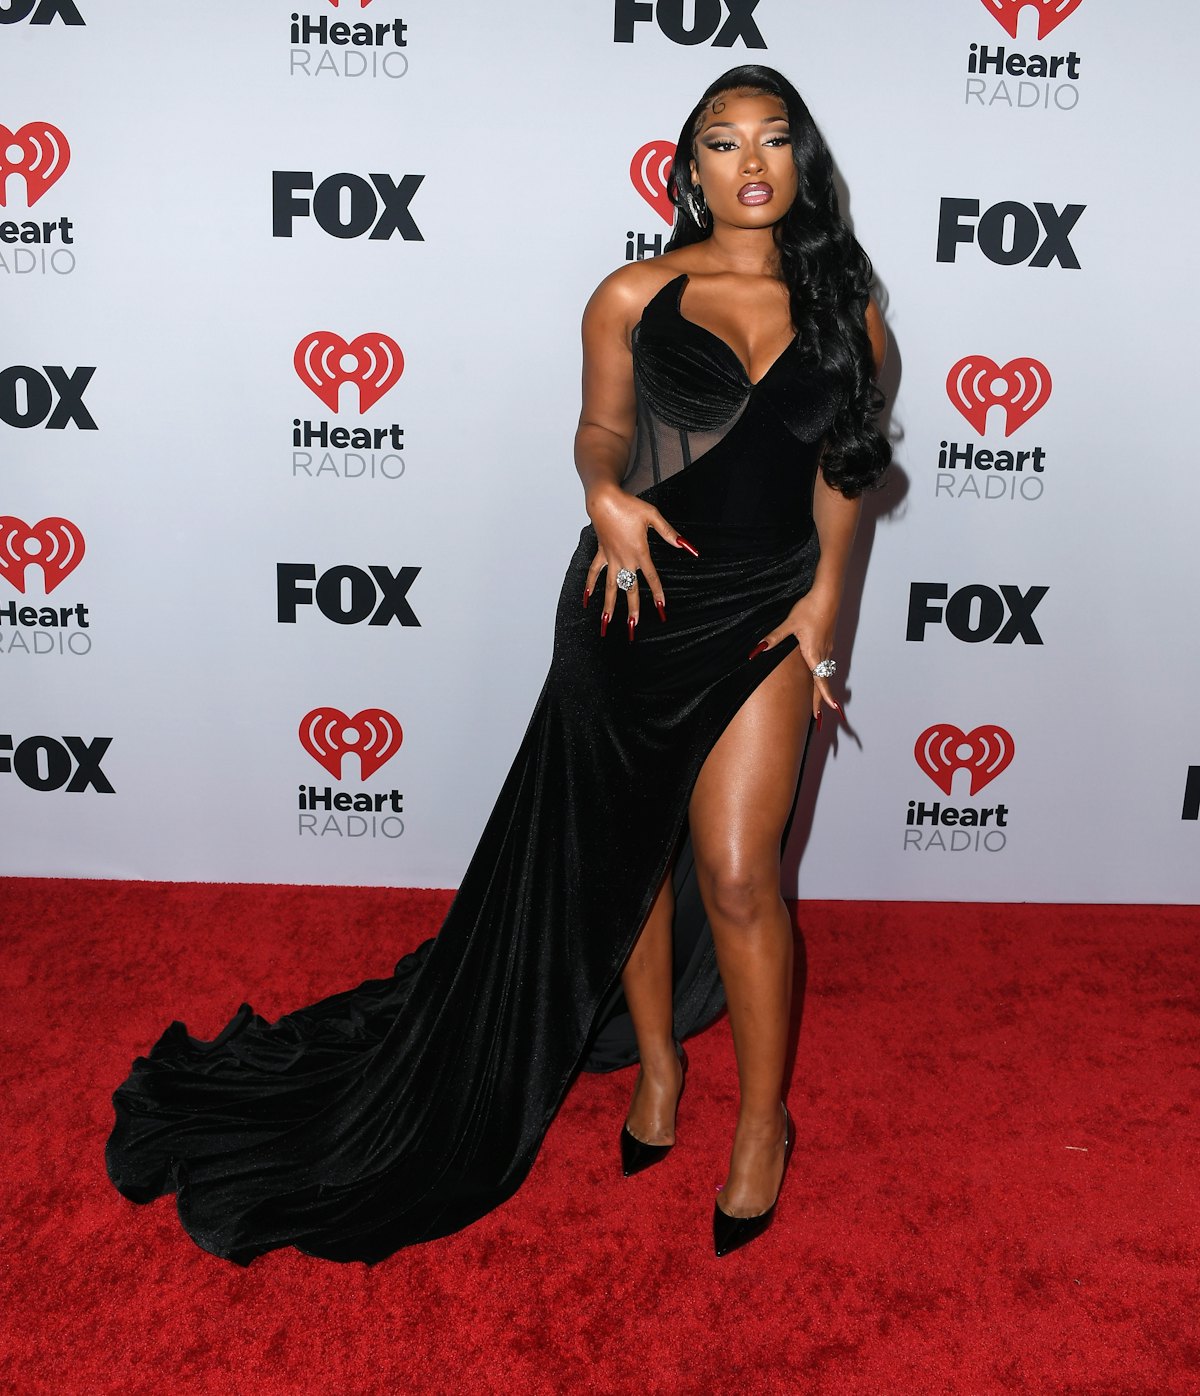 LOS ANGELES, CALIFORNIA - MARCH 22: Megan Thee Stallion arrives at the 2022 iHeartRadio Music Awards...